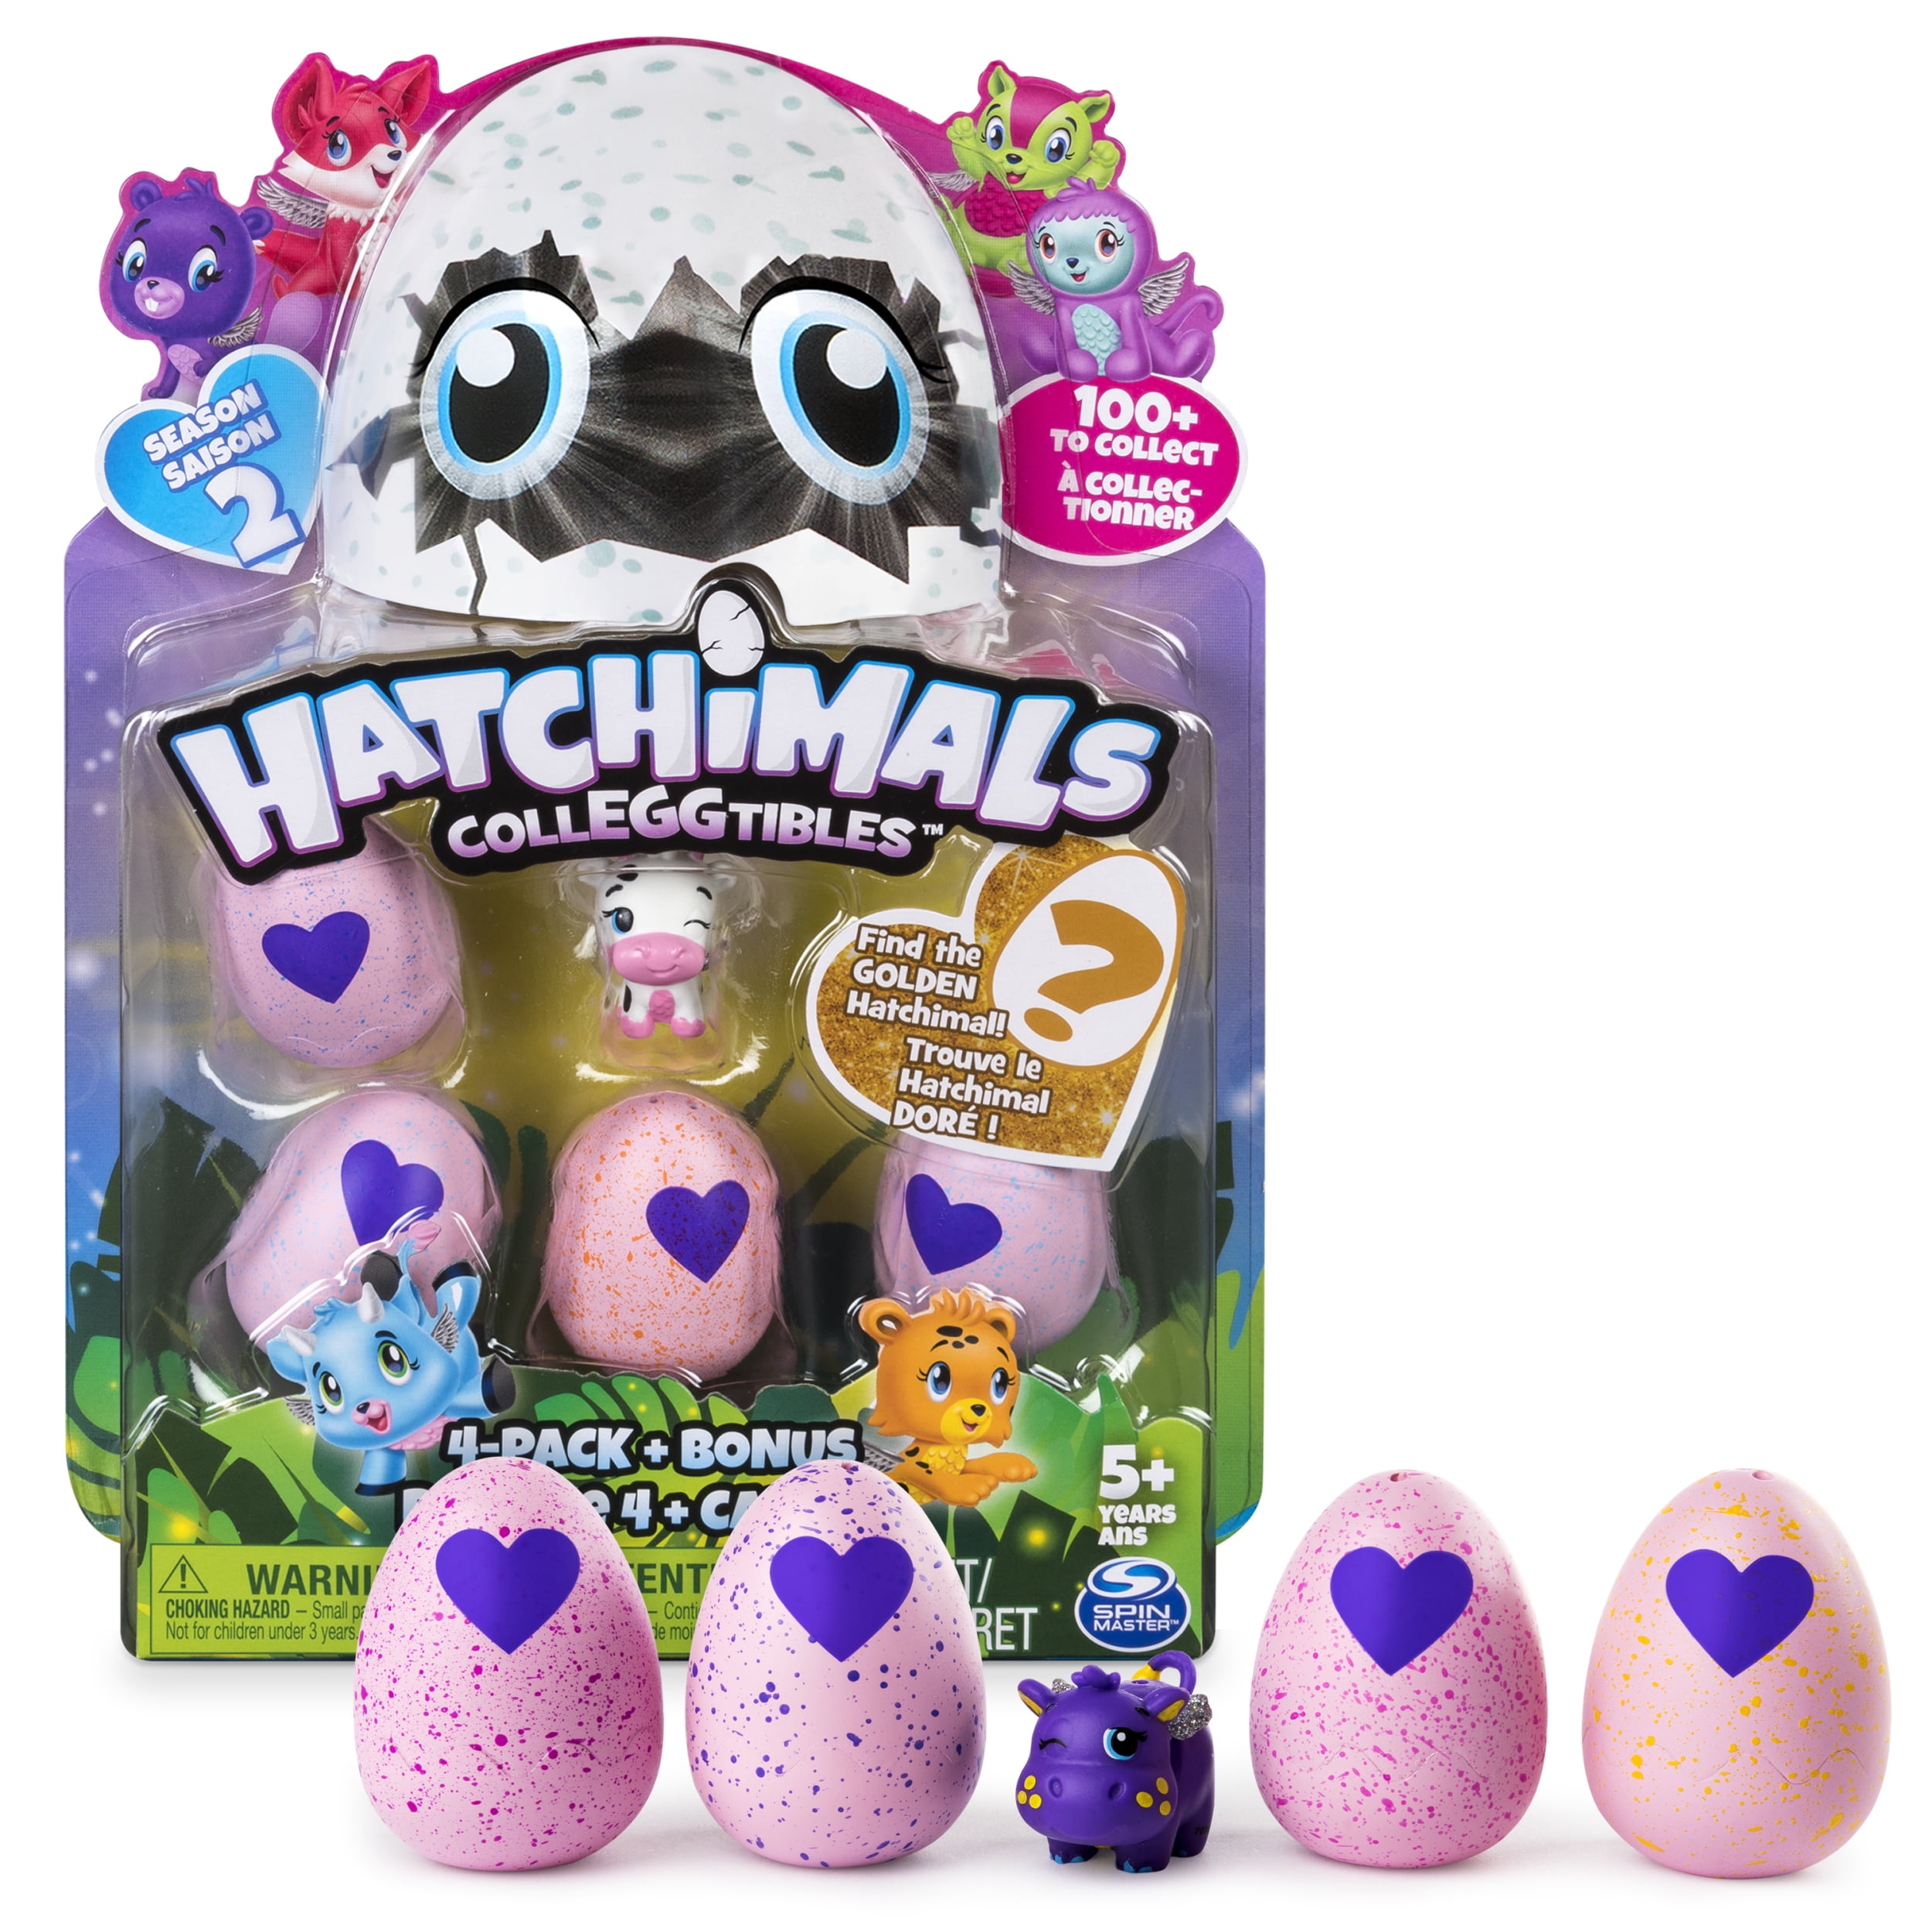 Hatchimals Wow 32 inch Tall Interactive Toy with Egg Brand New Fast Shippping! 